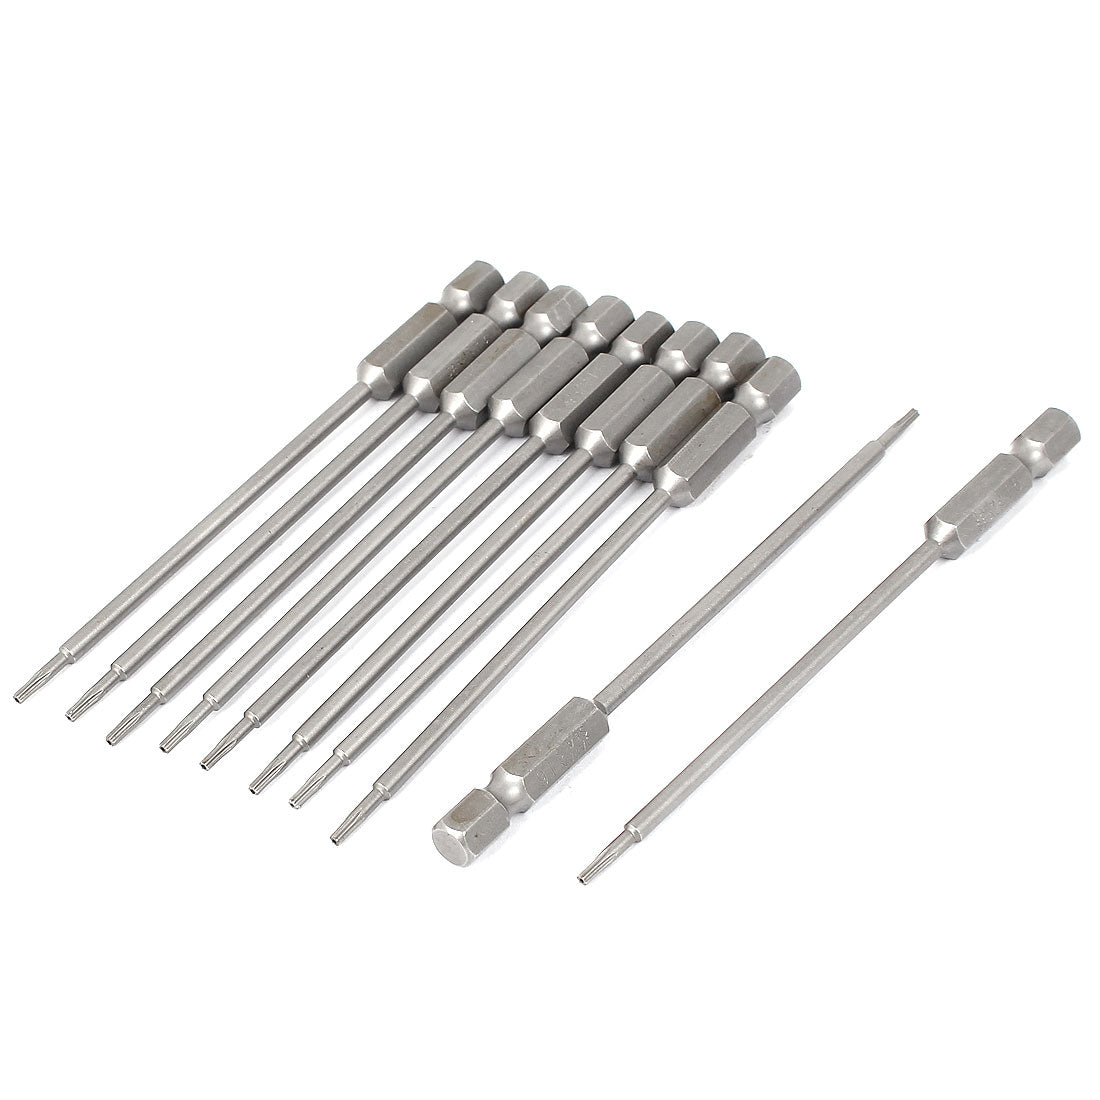 uxcell Uxcell 100mm Length 1/4" Hex Shank T6 Magnetic Torx Security Screwdriver Bits 10pcs